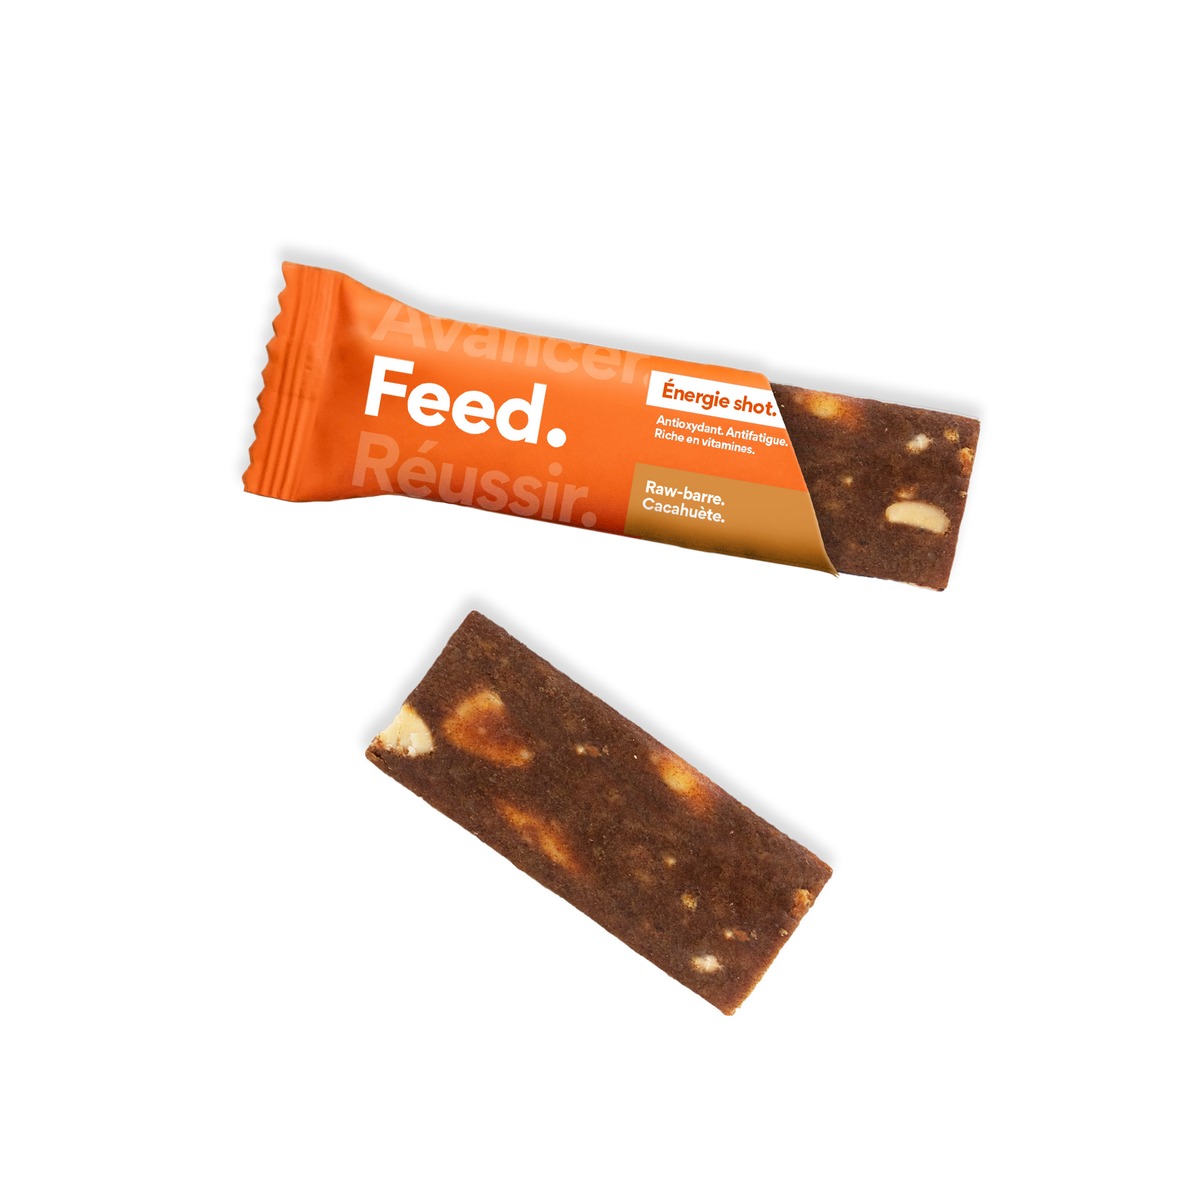 NAKD raw barre datte-cacahuète - 35 g x 18 pc - Distributeur alimentaire  snacking